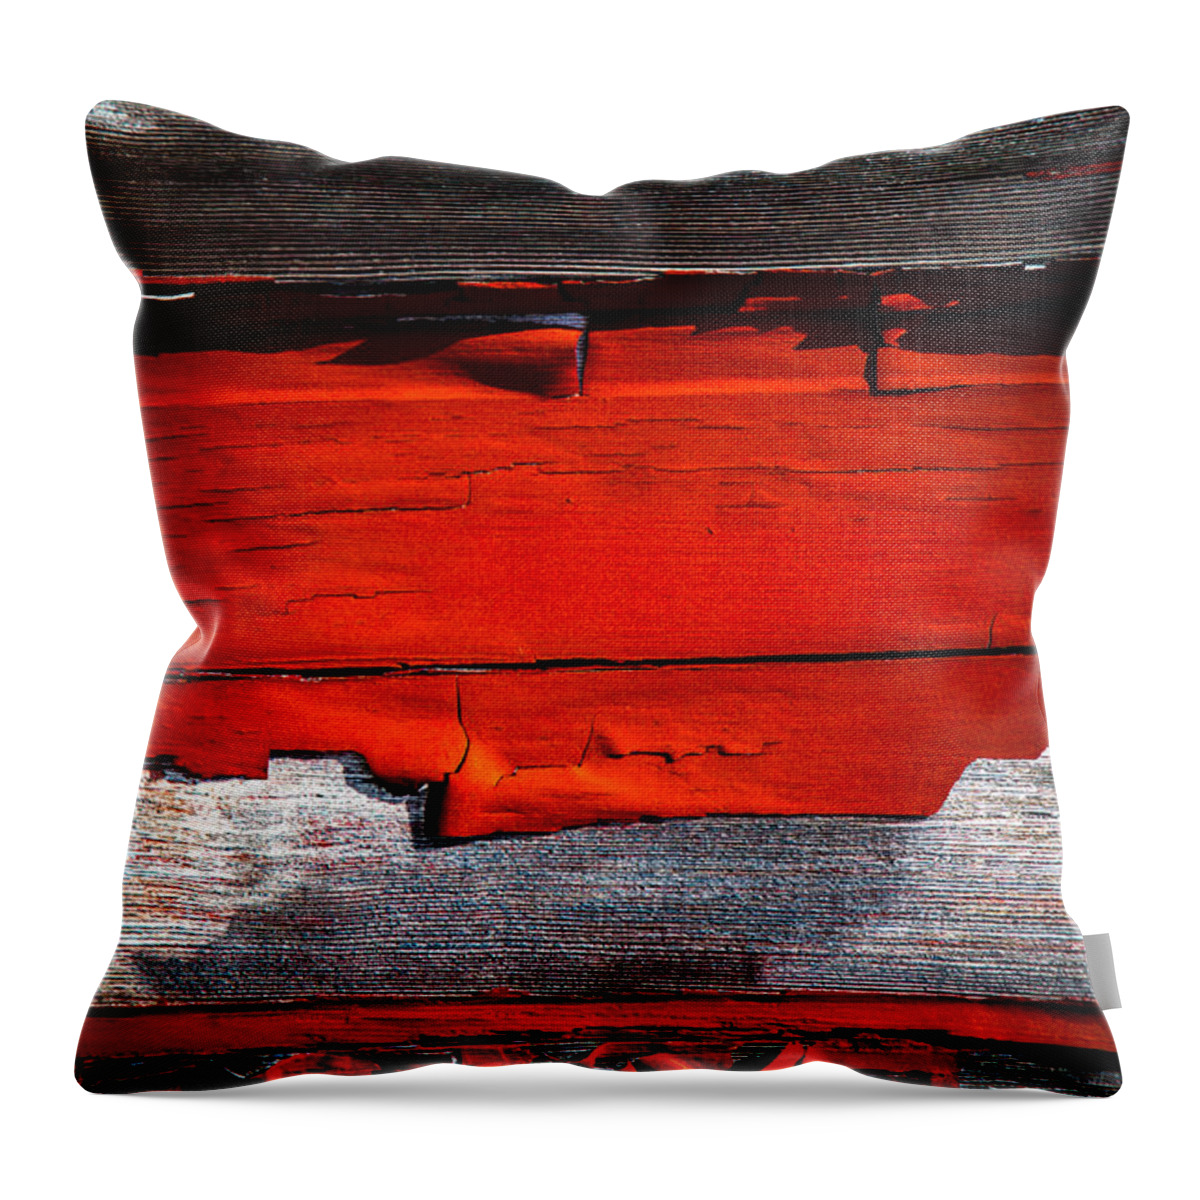 Abstract Throw Pillow featuring the photograph Old Red Barn Three by Bob Orsillo